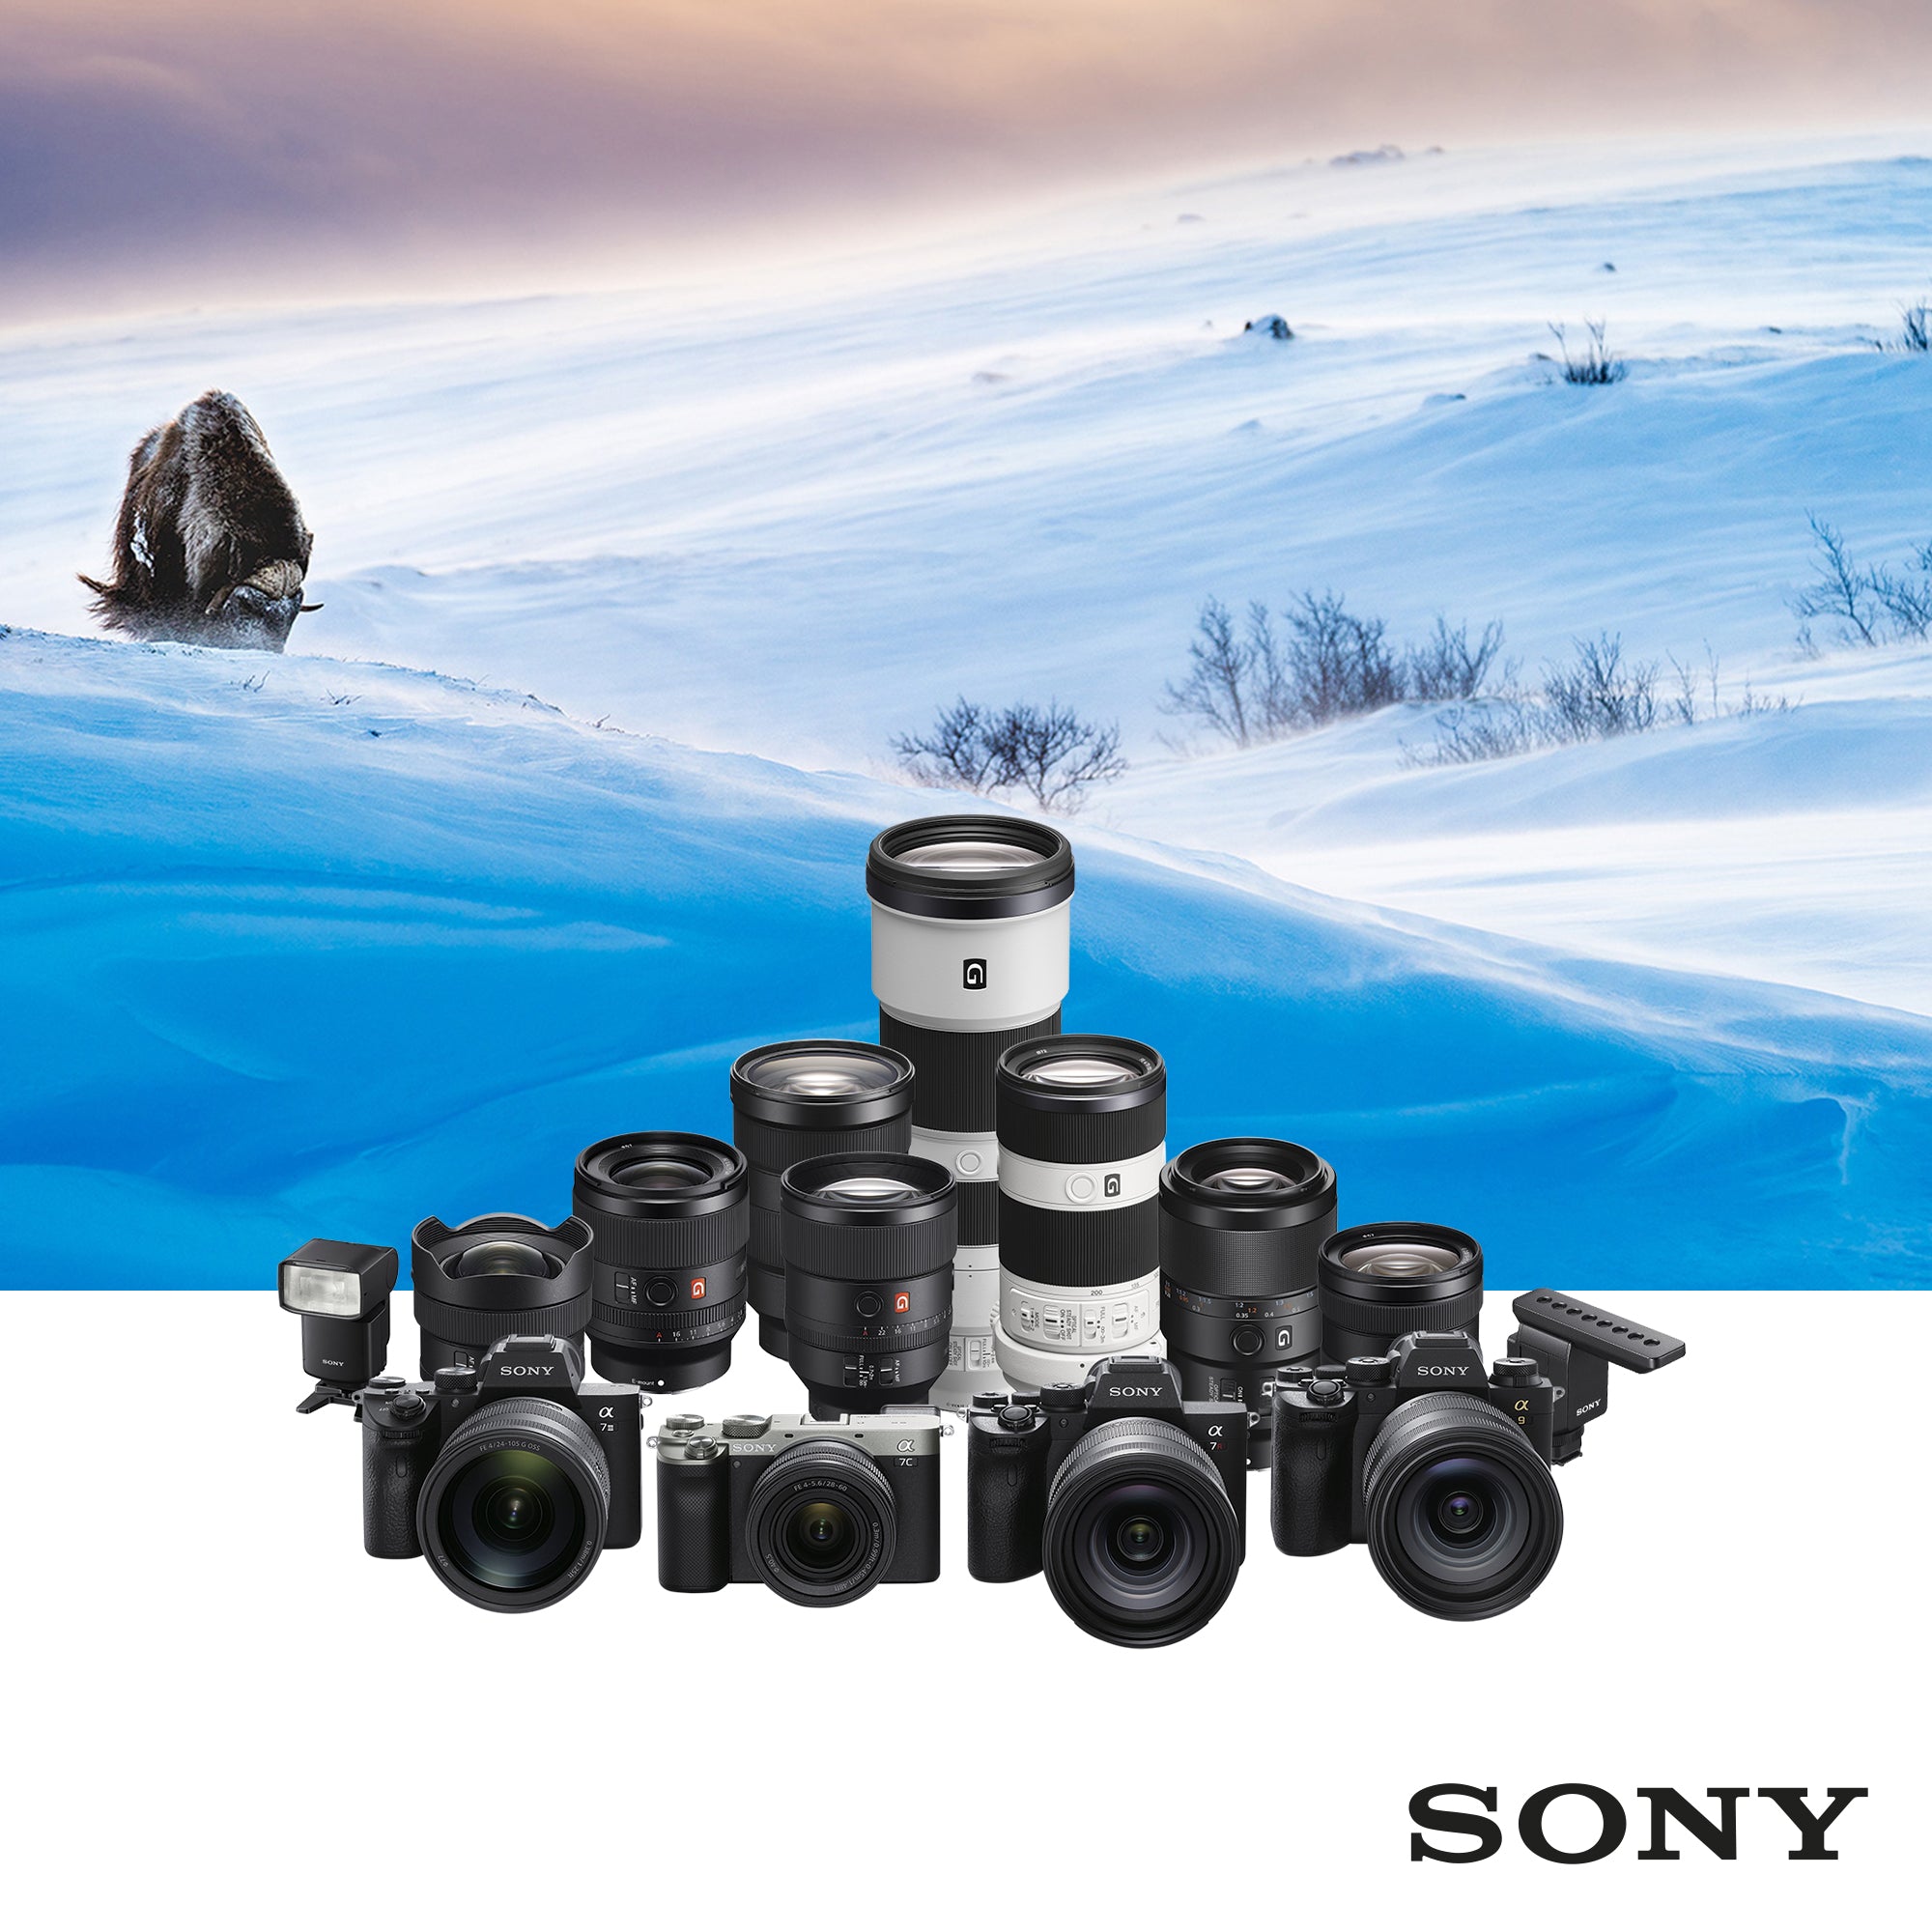 New Winter Cashback from Sony